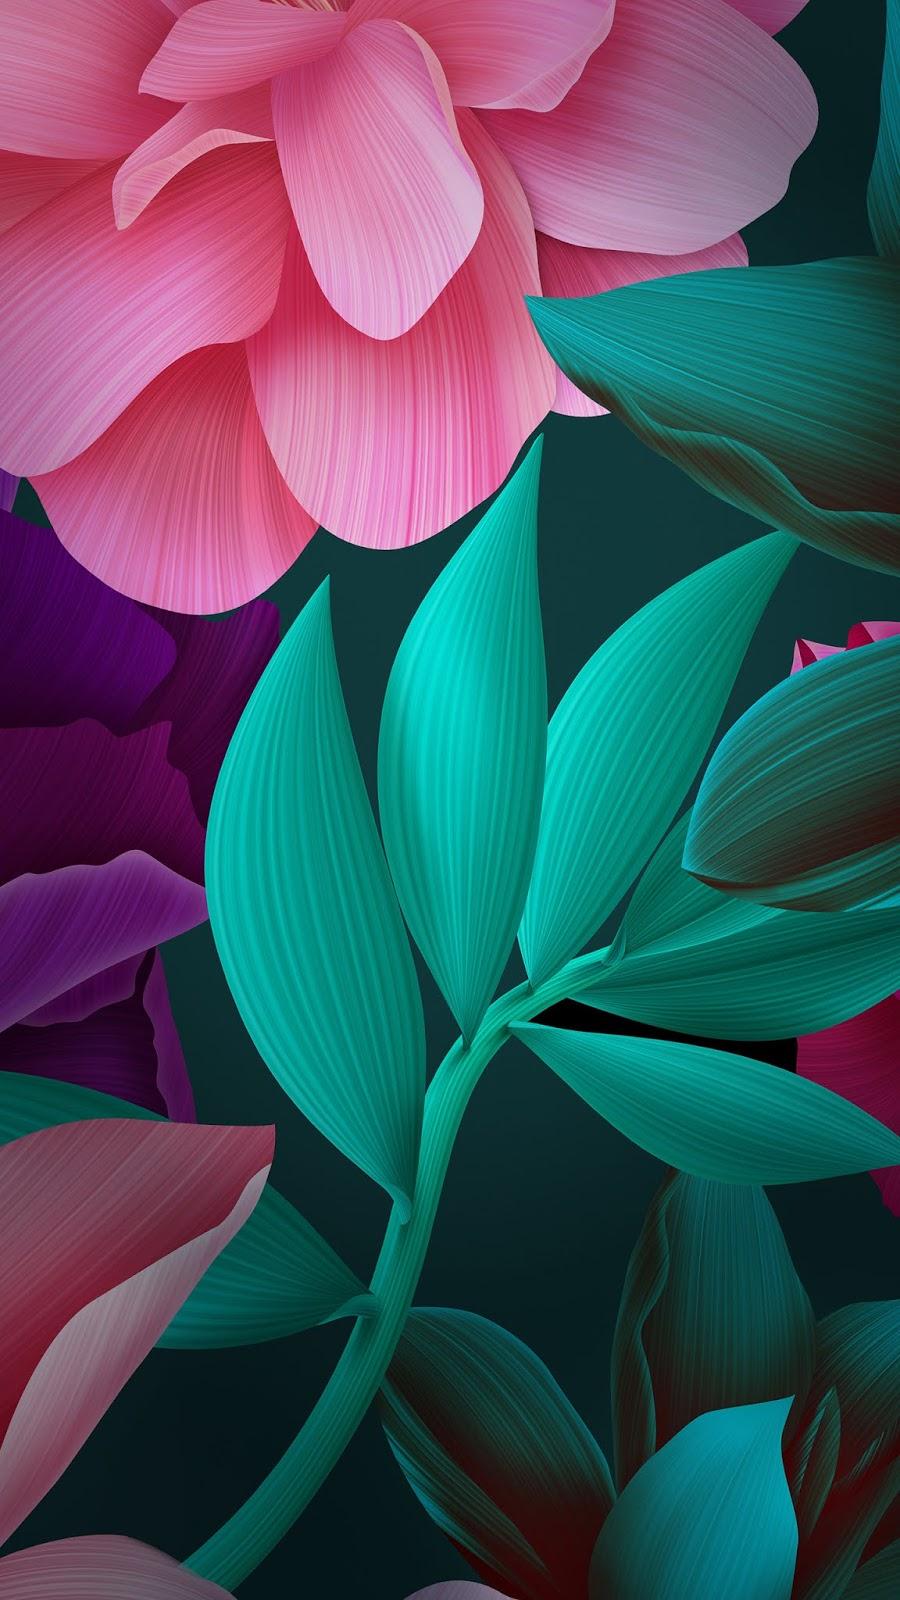 3D Wallpapers For Mobile 